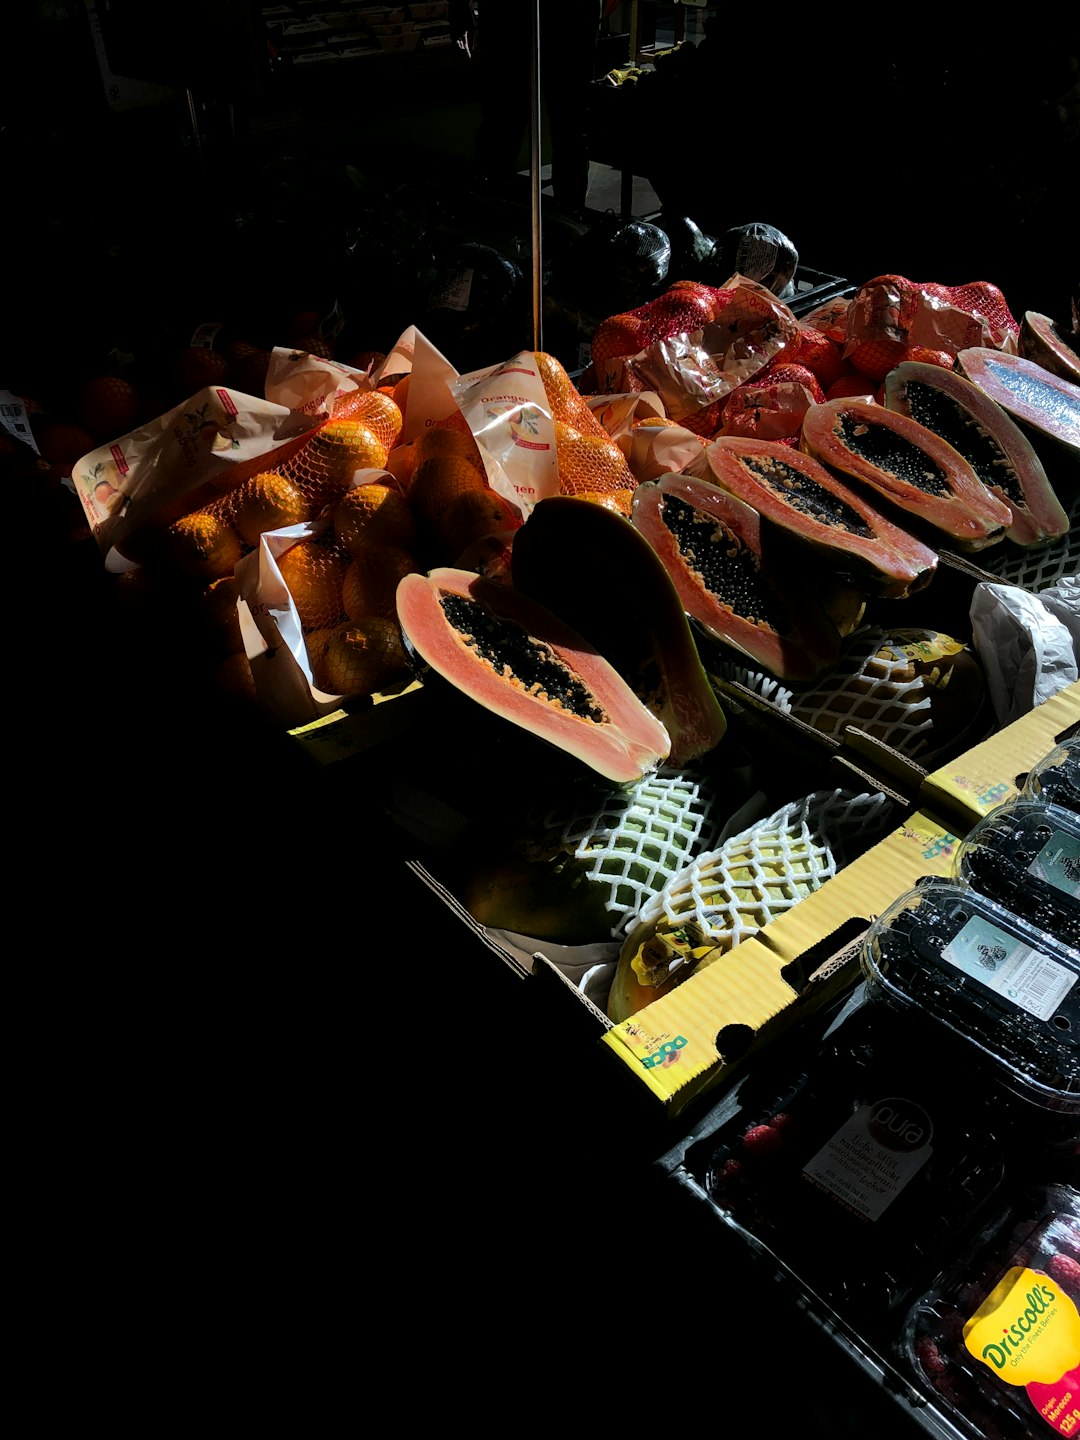 raw meat on display in the market